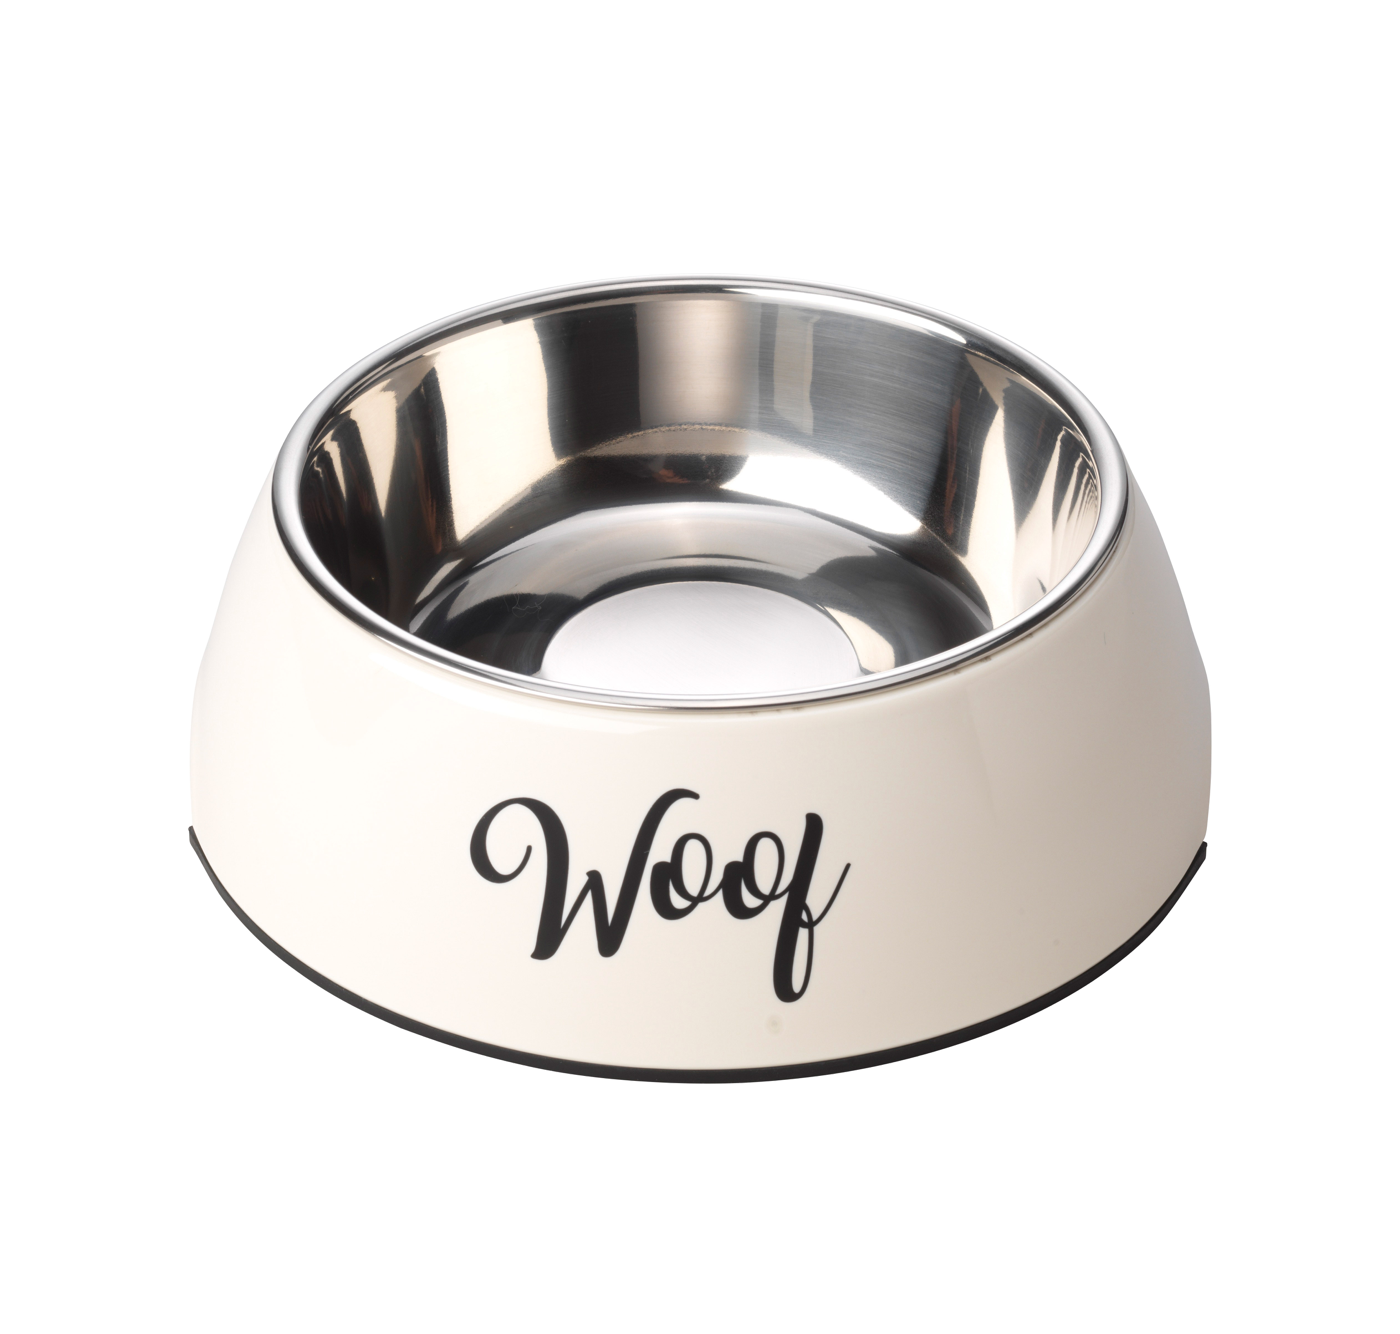 Woof Cream Dog Bowl by House of Paws